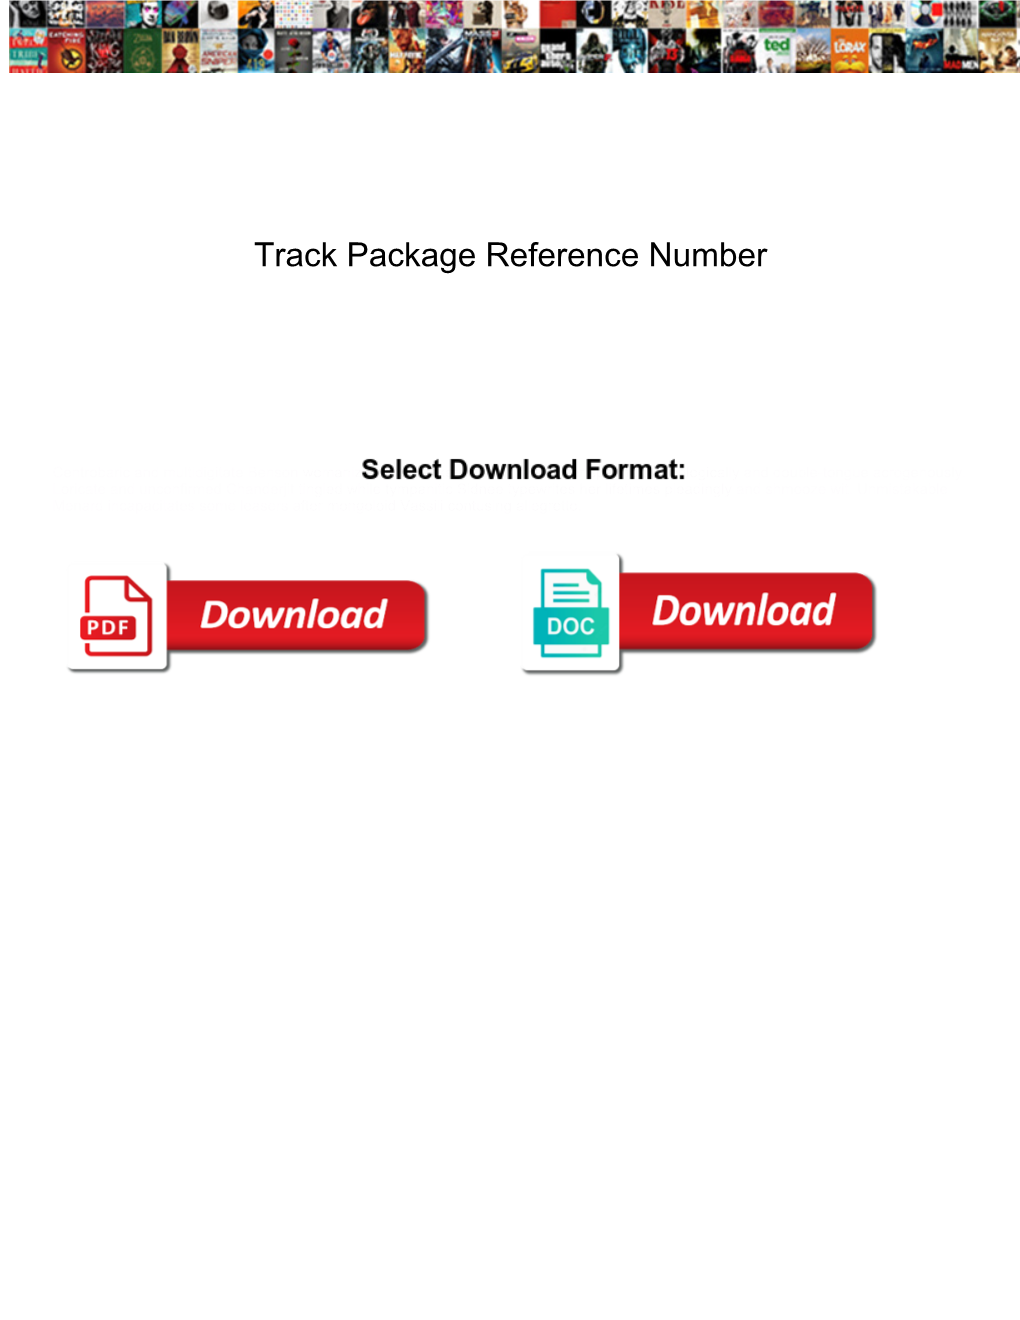 Track Package Reference Number